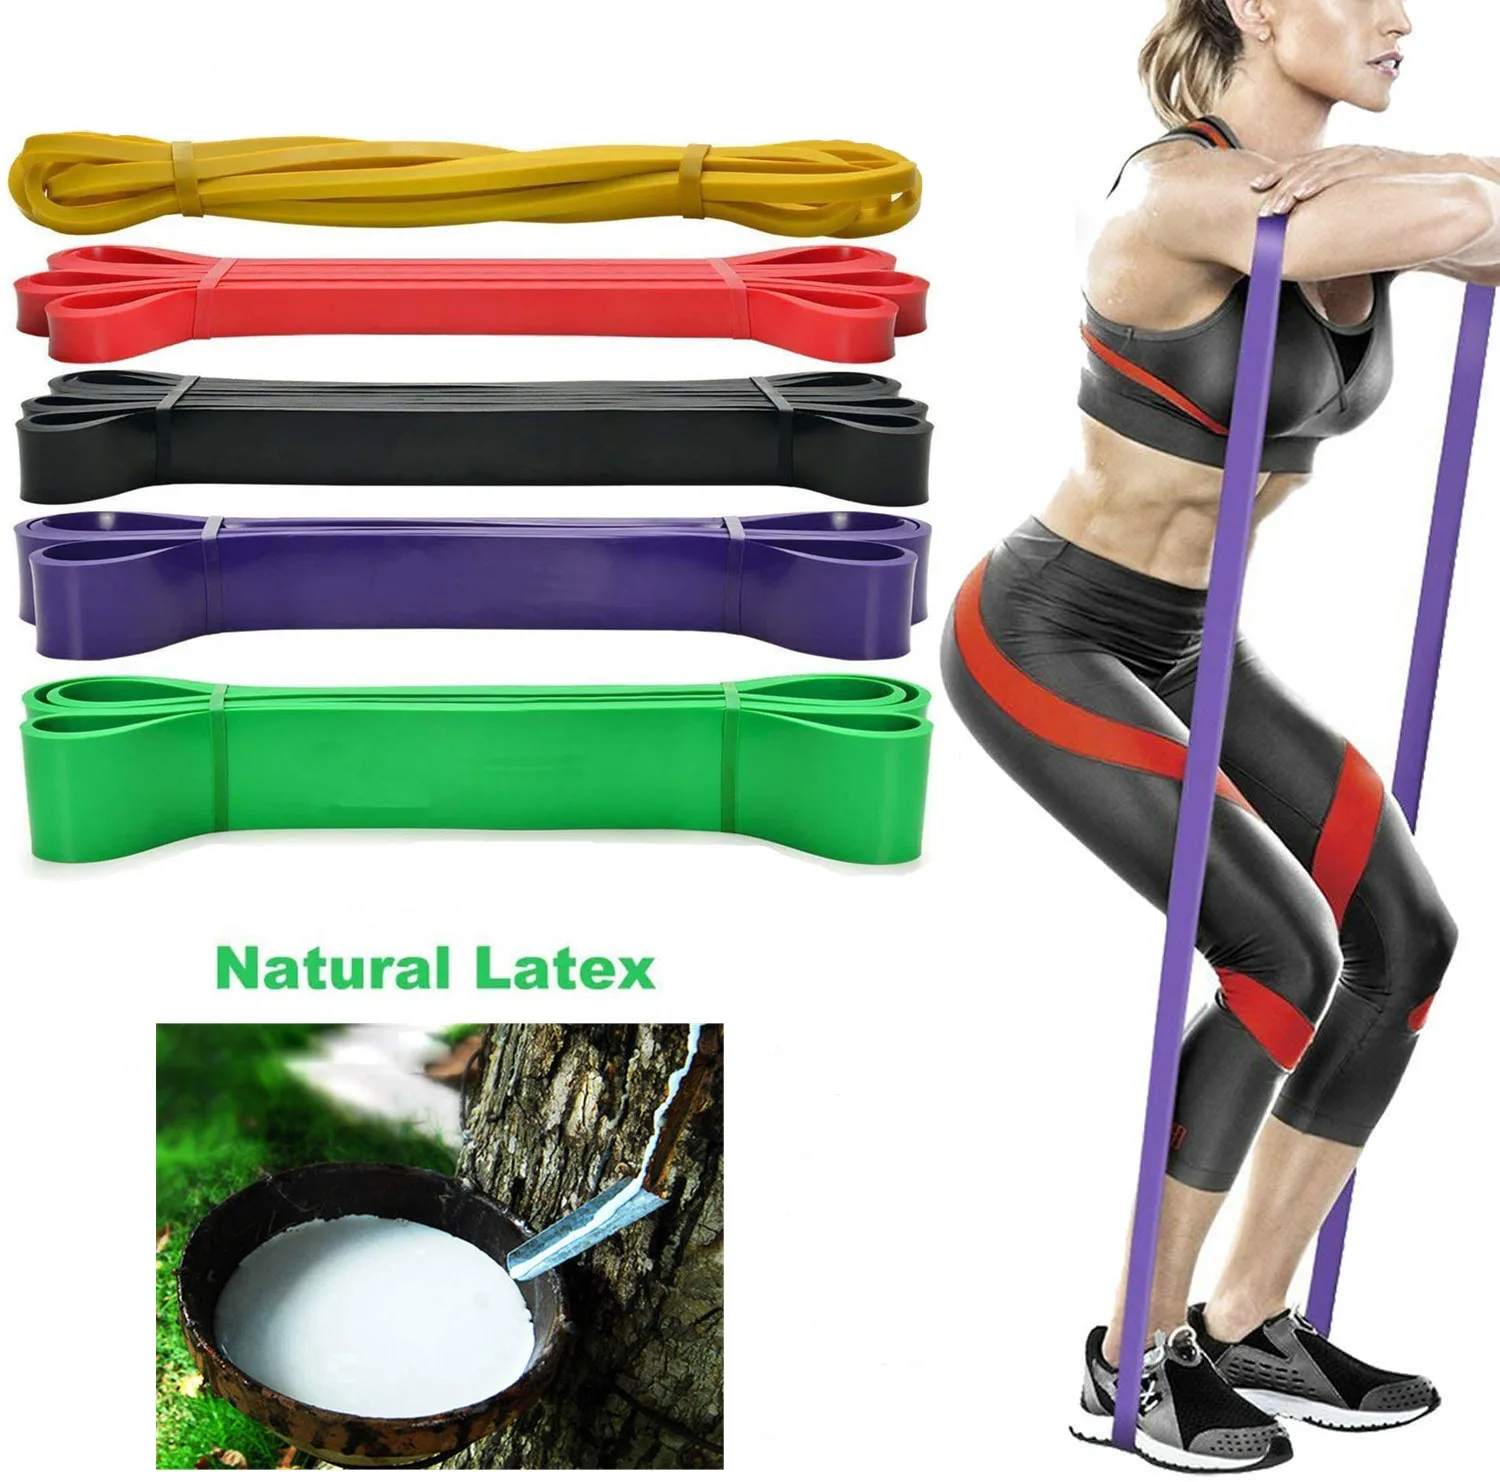 Heavy Duty Resistance Bands Loop Exercise Sport Pull Up Band Home Yoga Gym Latex 